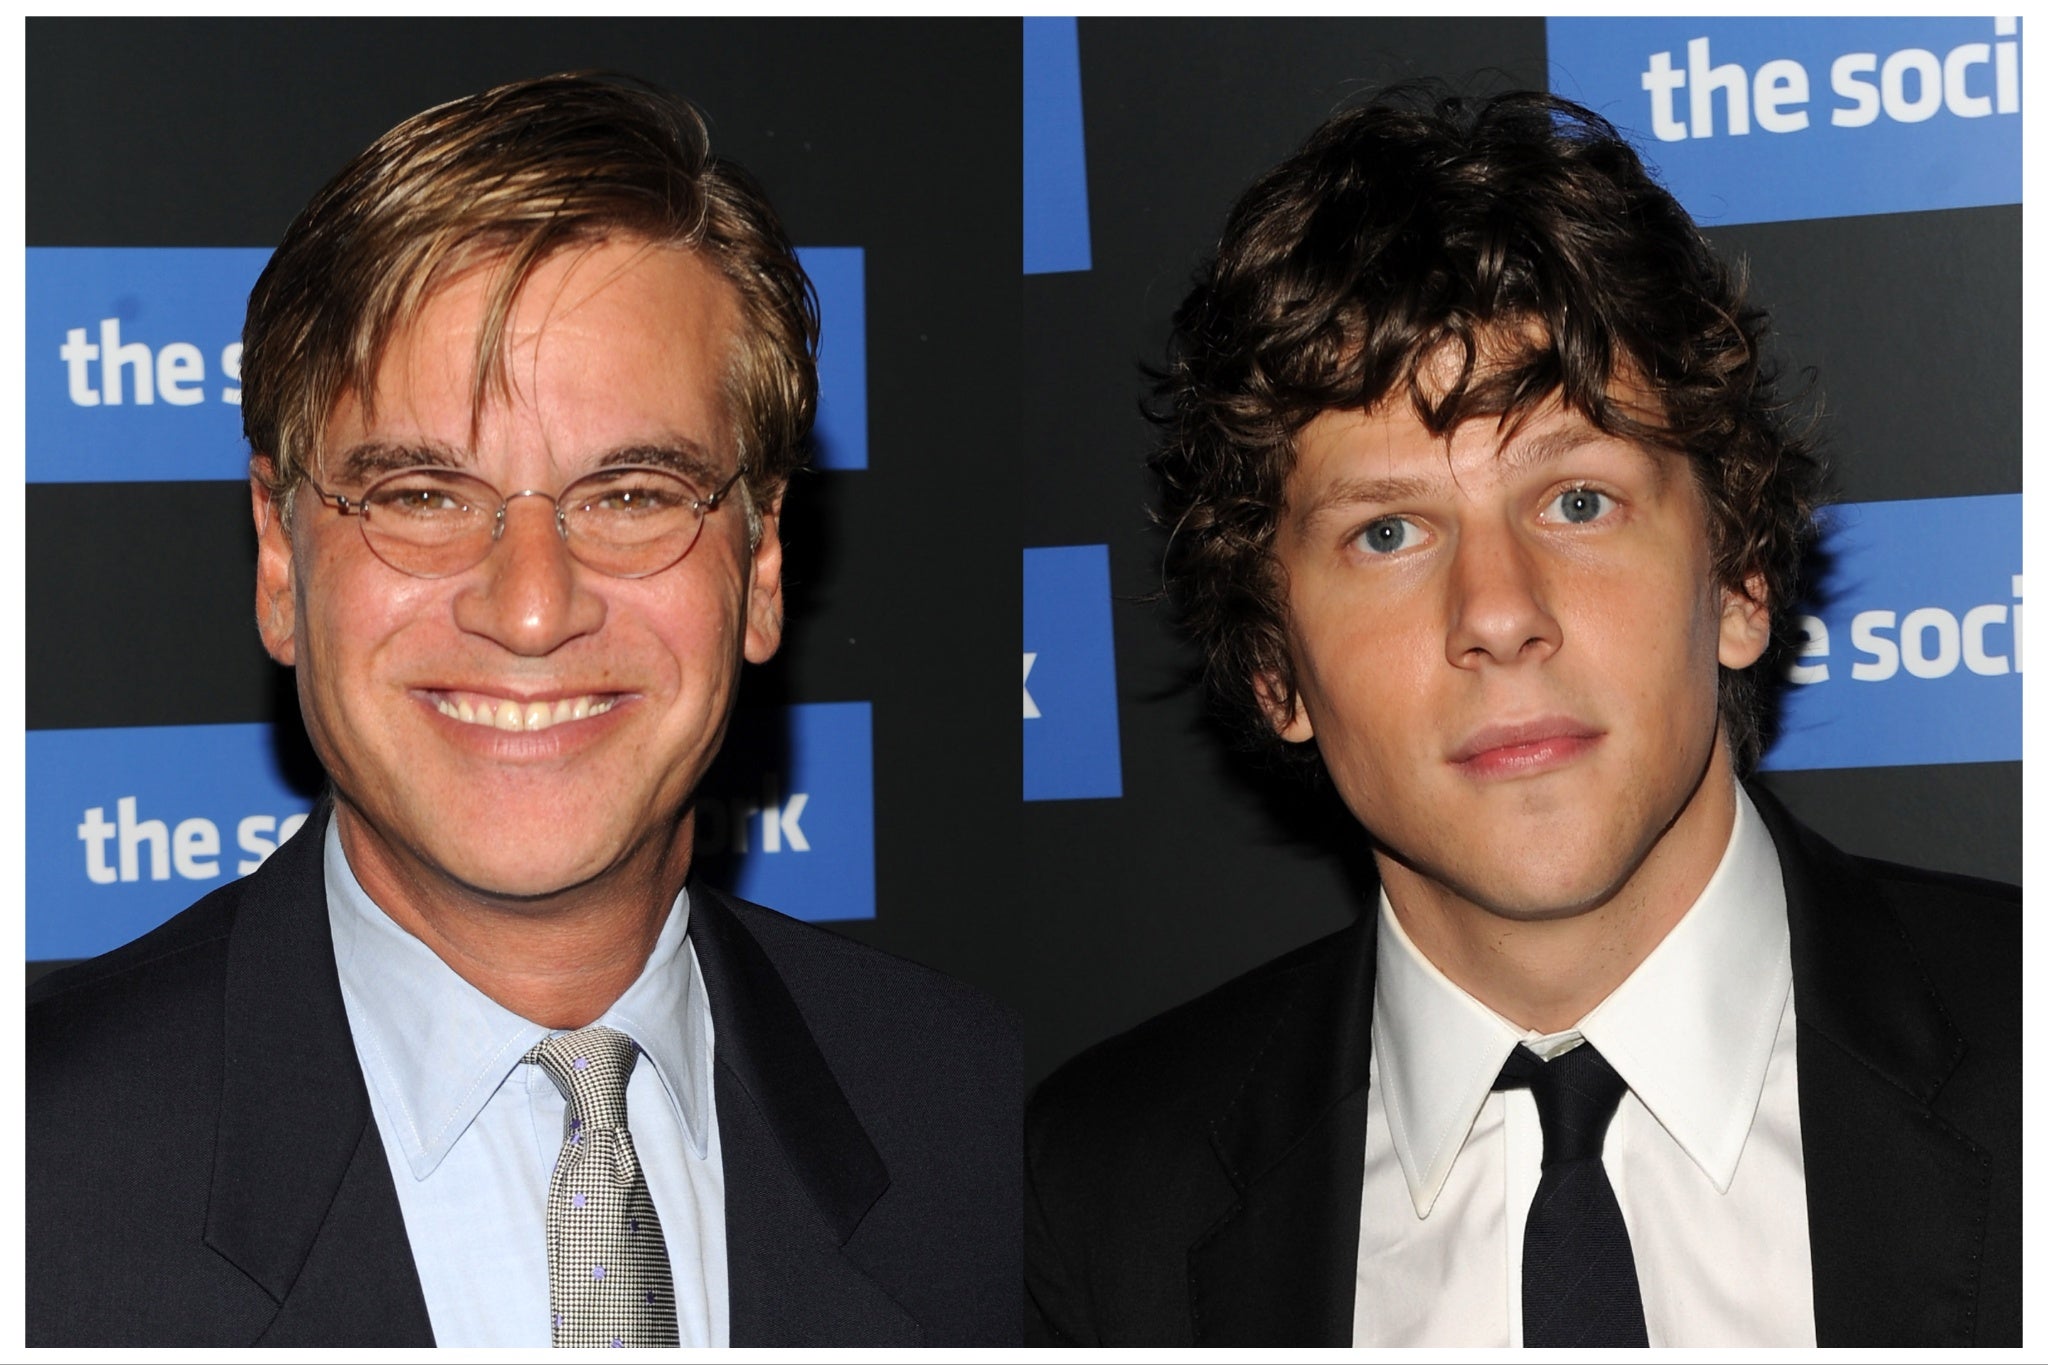 Aaron Sorkin and ‘The Social Network’ star Jesse Eisenberg in New York in 2010